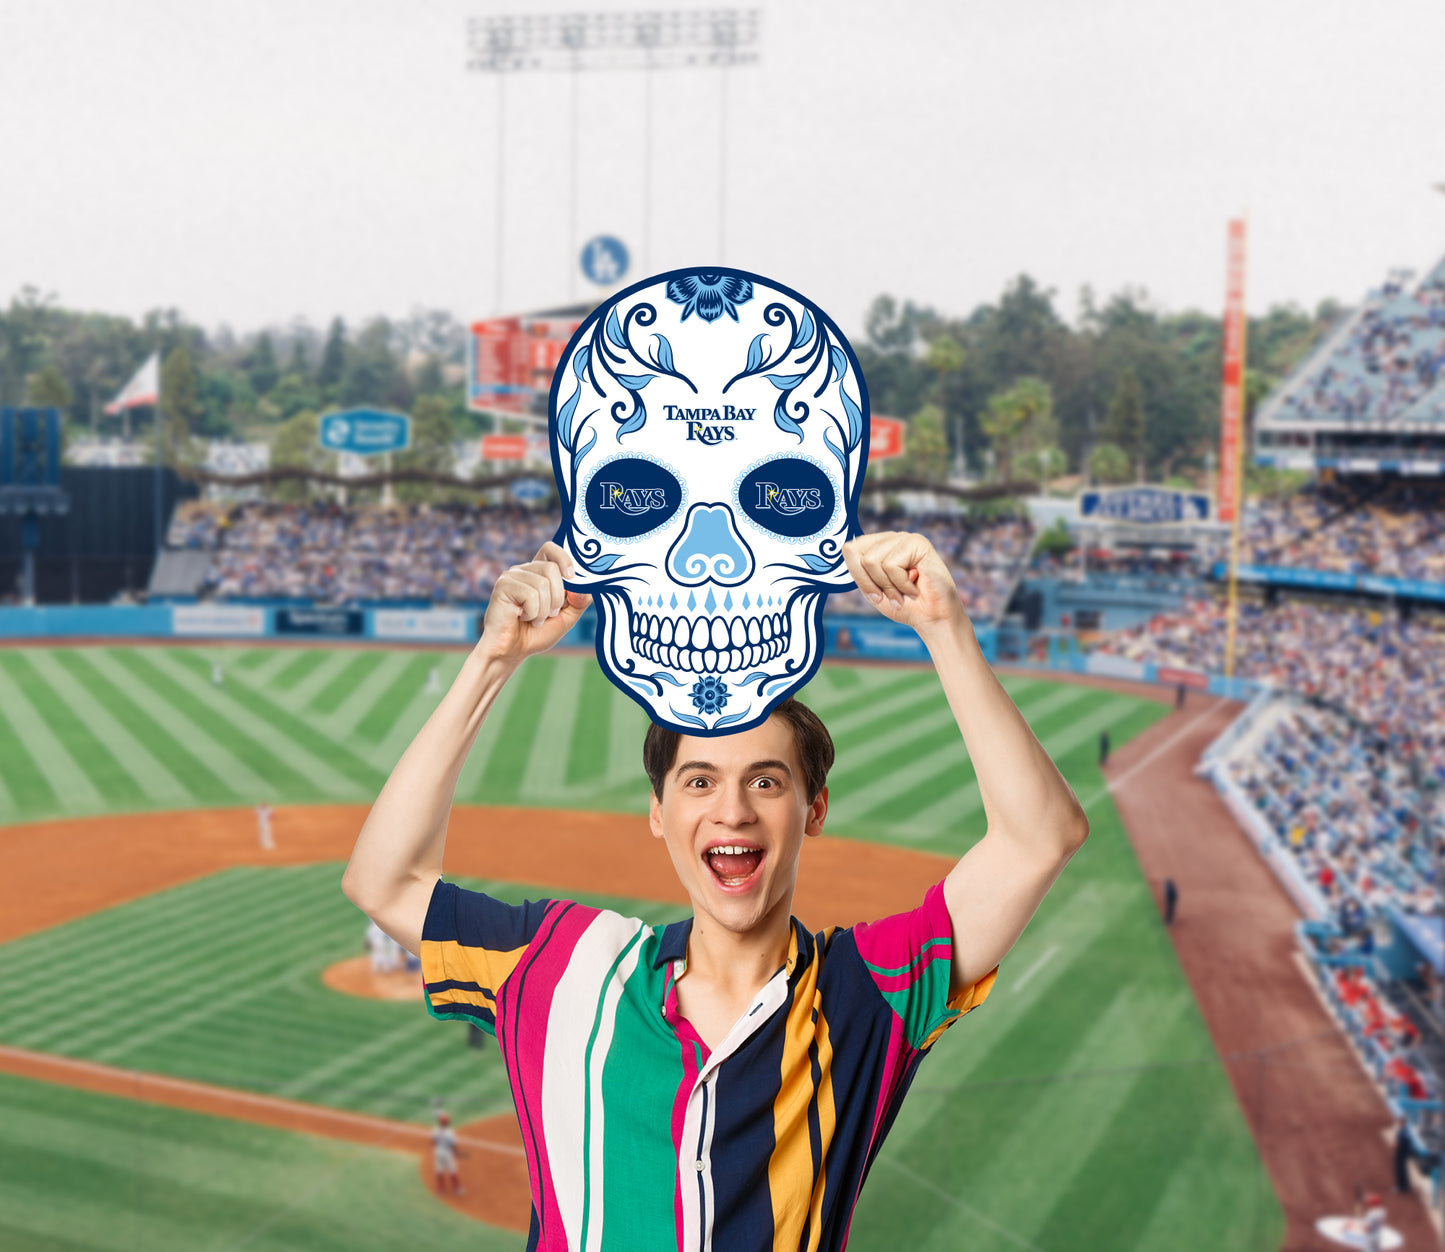 Tampa Bay Rays: Skull Foam Core Cutout - Officially Licensed MLB Big Head